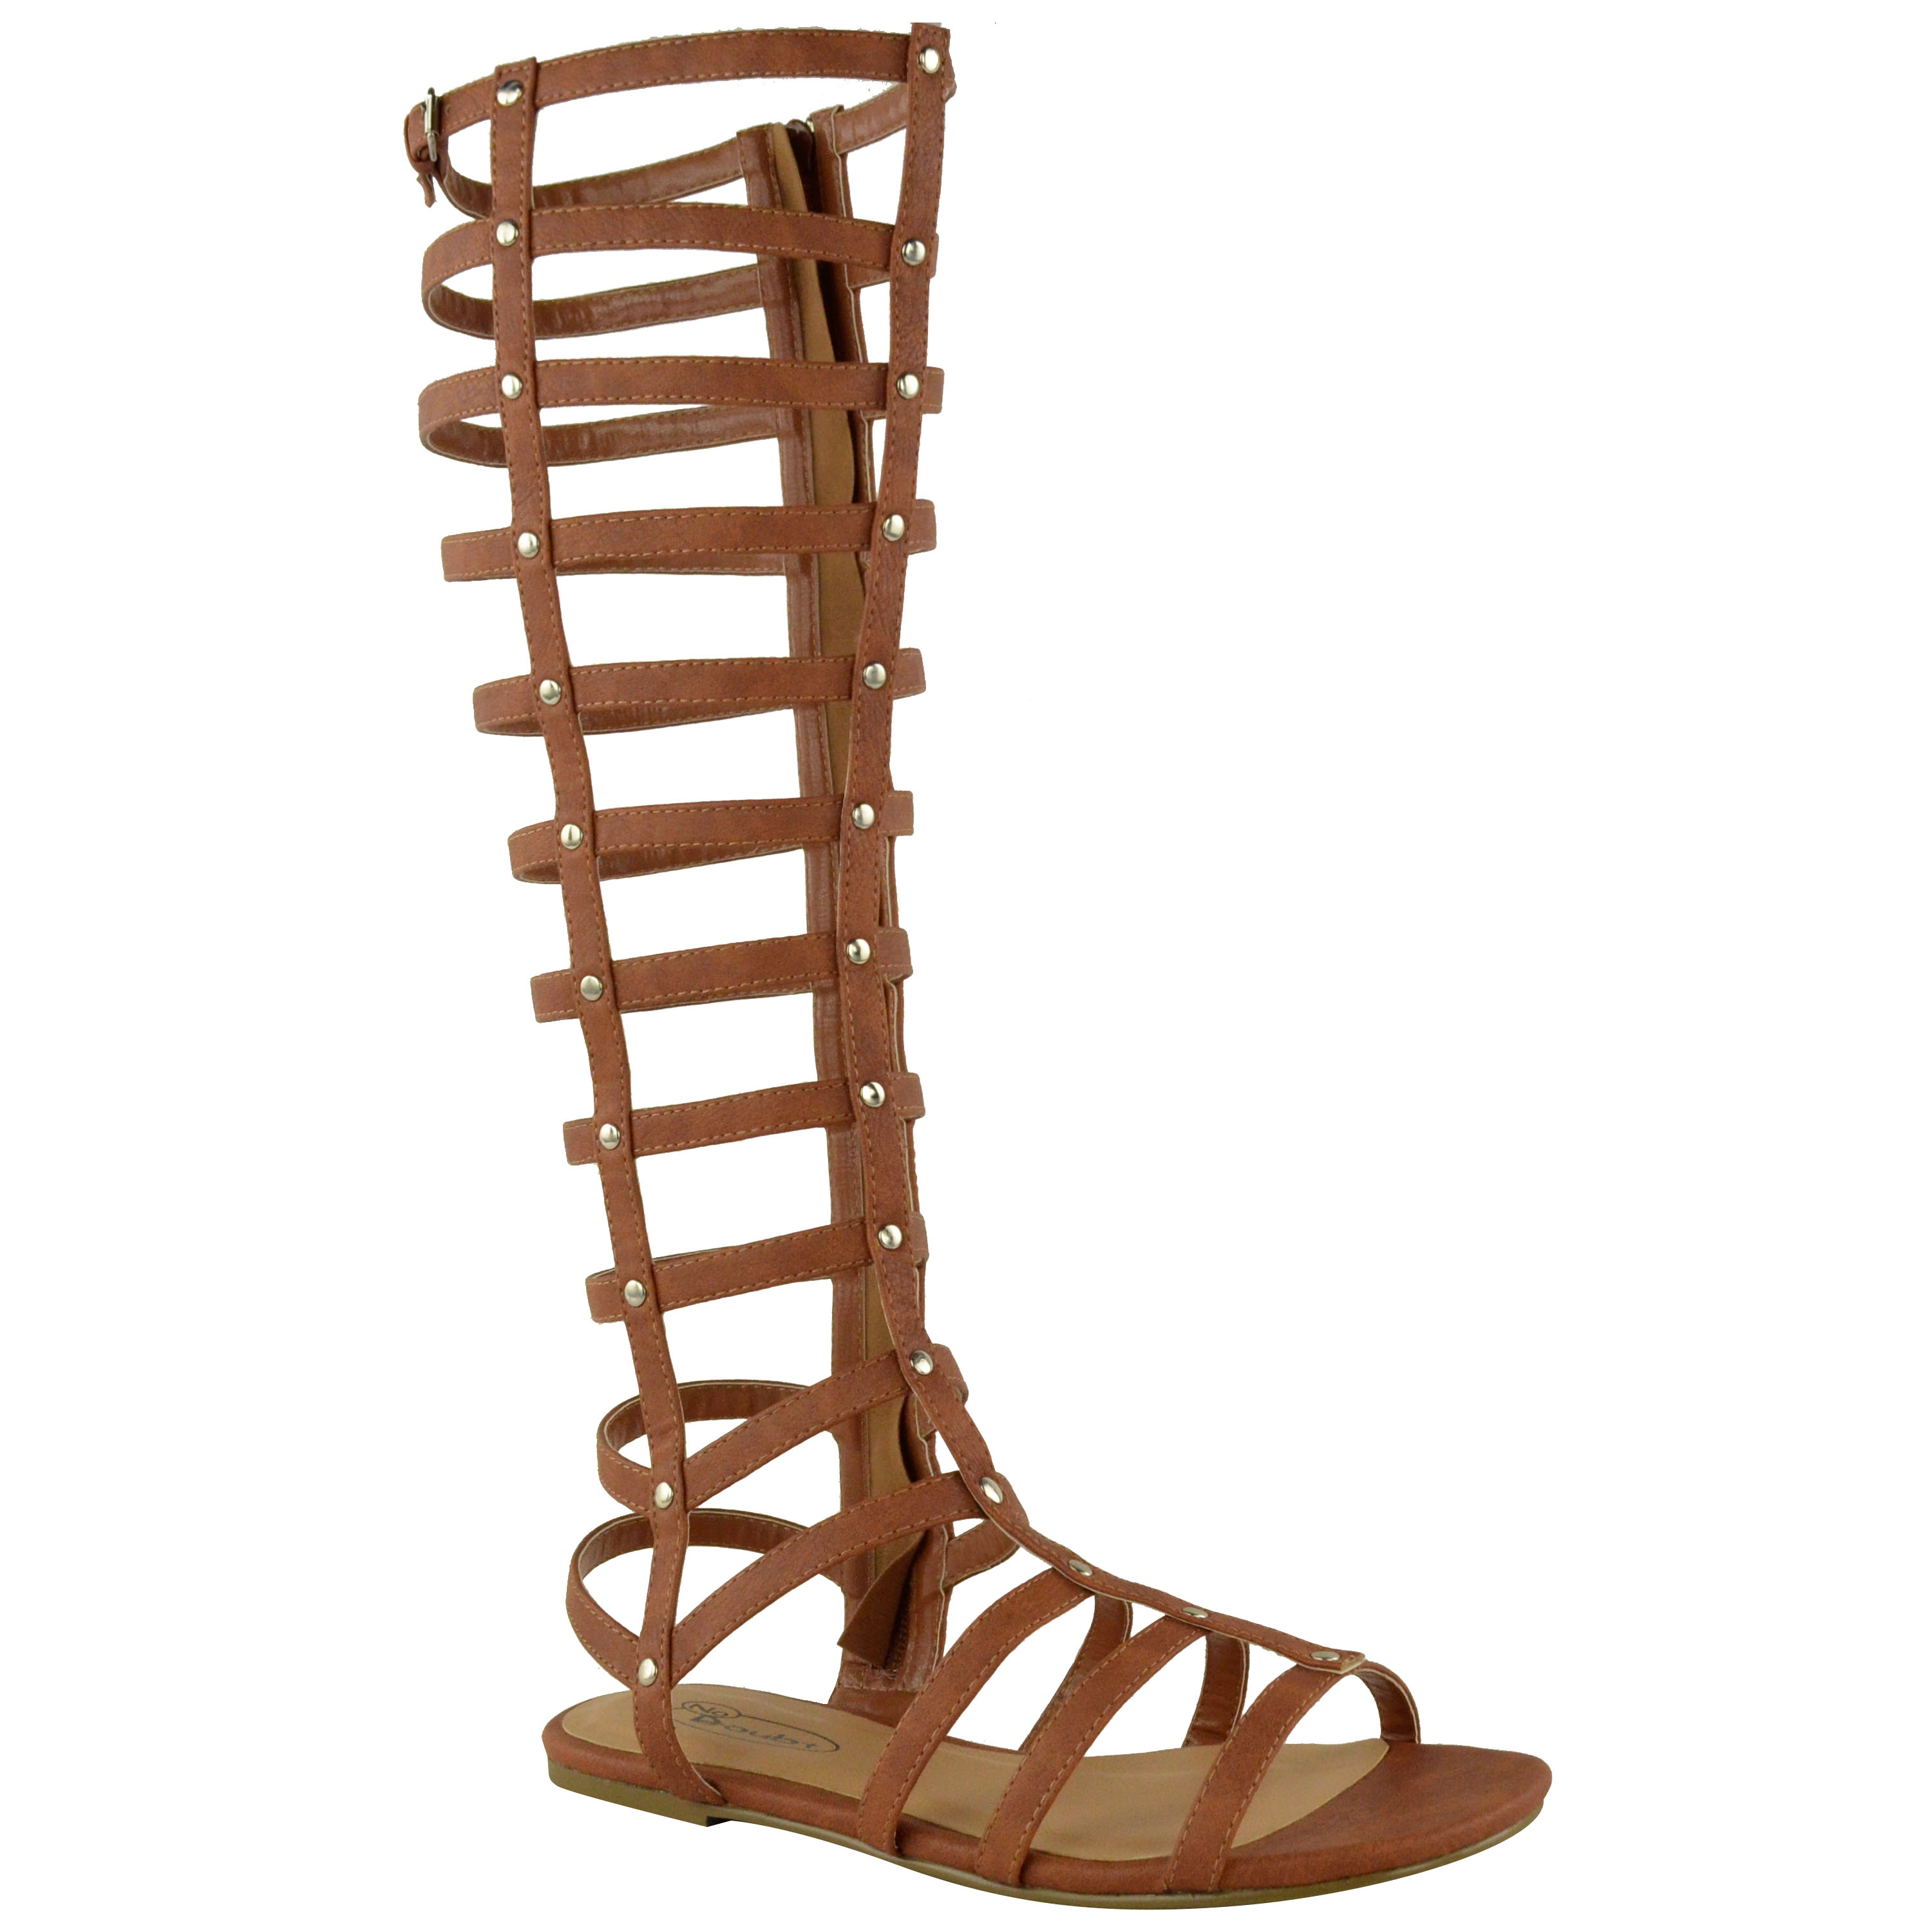 ... HIGH GLADIATOR SANDALS CUT OUT FLAT STRAPPY SUMMER SHOES SIZE | eBay